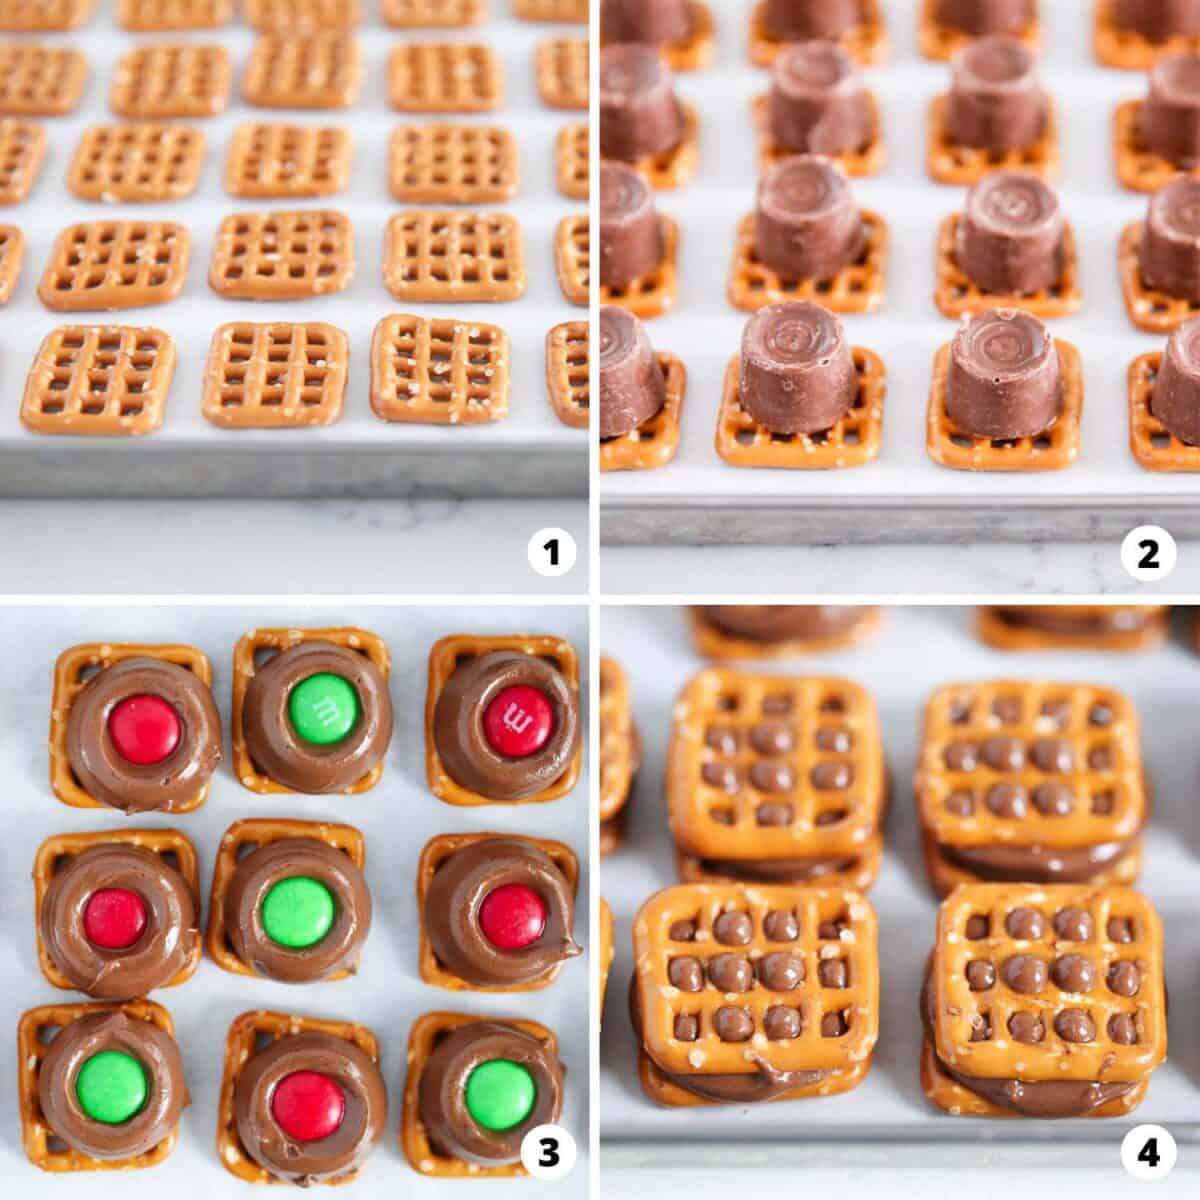 Showing how to make rolo pretzels in a 4 step collage.